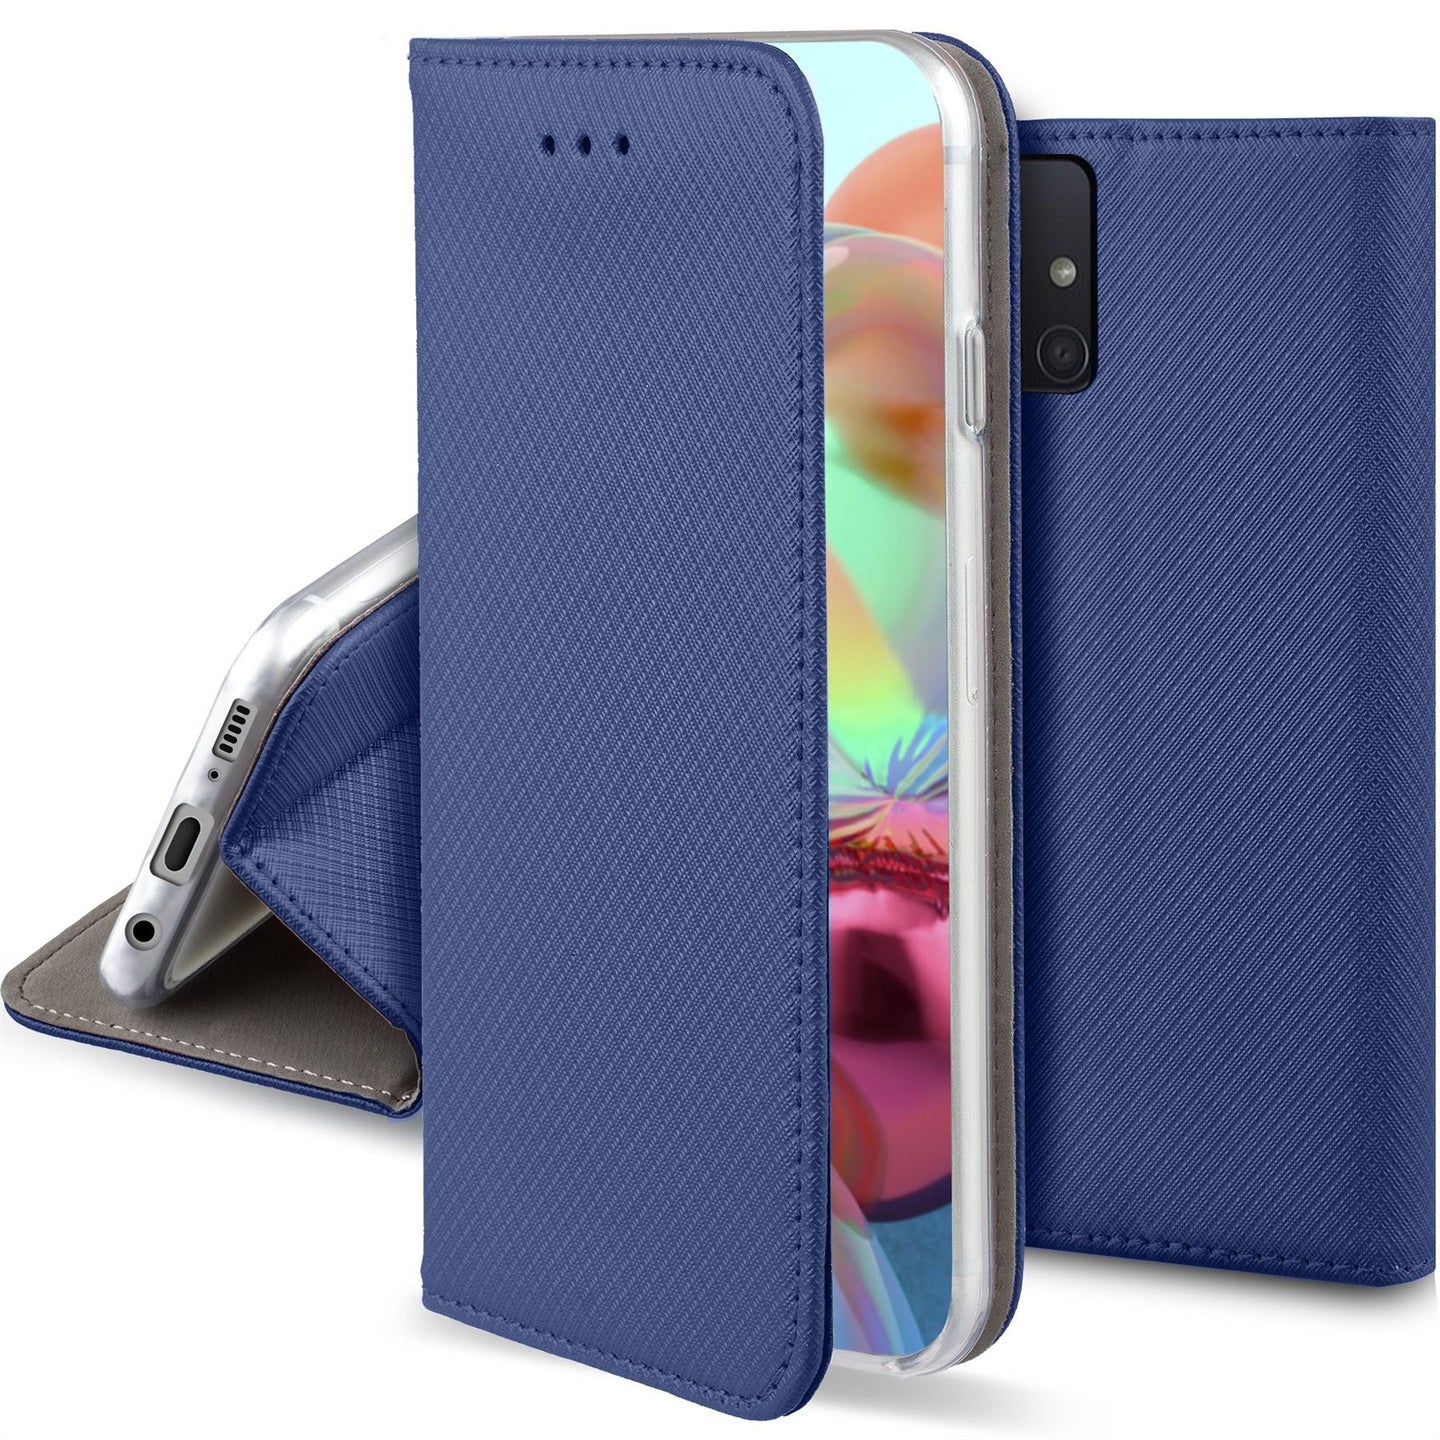 Moozy Case Flip Cover for Samsung A71, Dark Blue - Smart Magnetic Flip Case with Card Holder and Stand